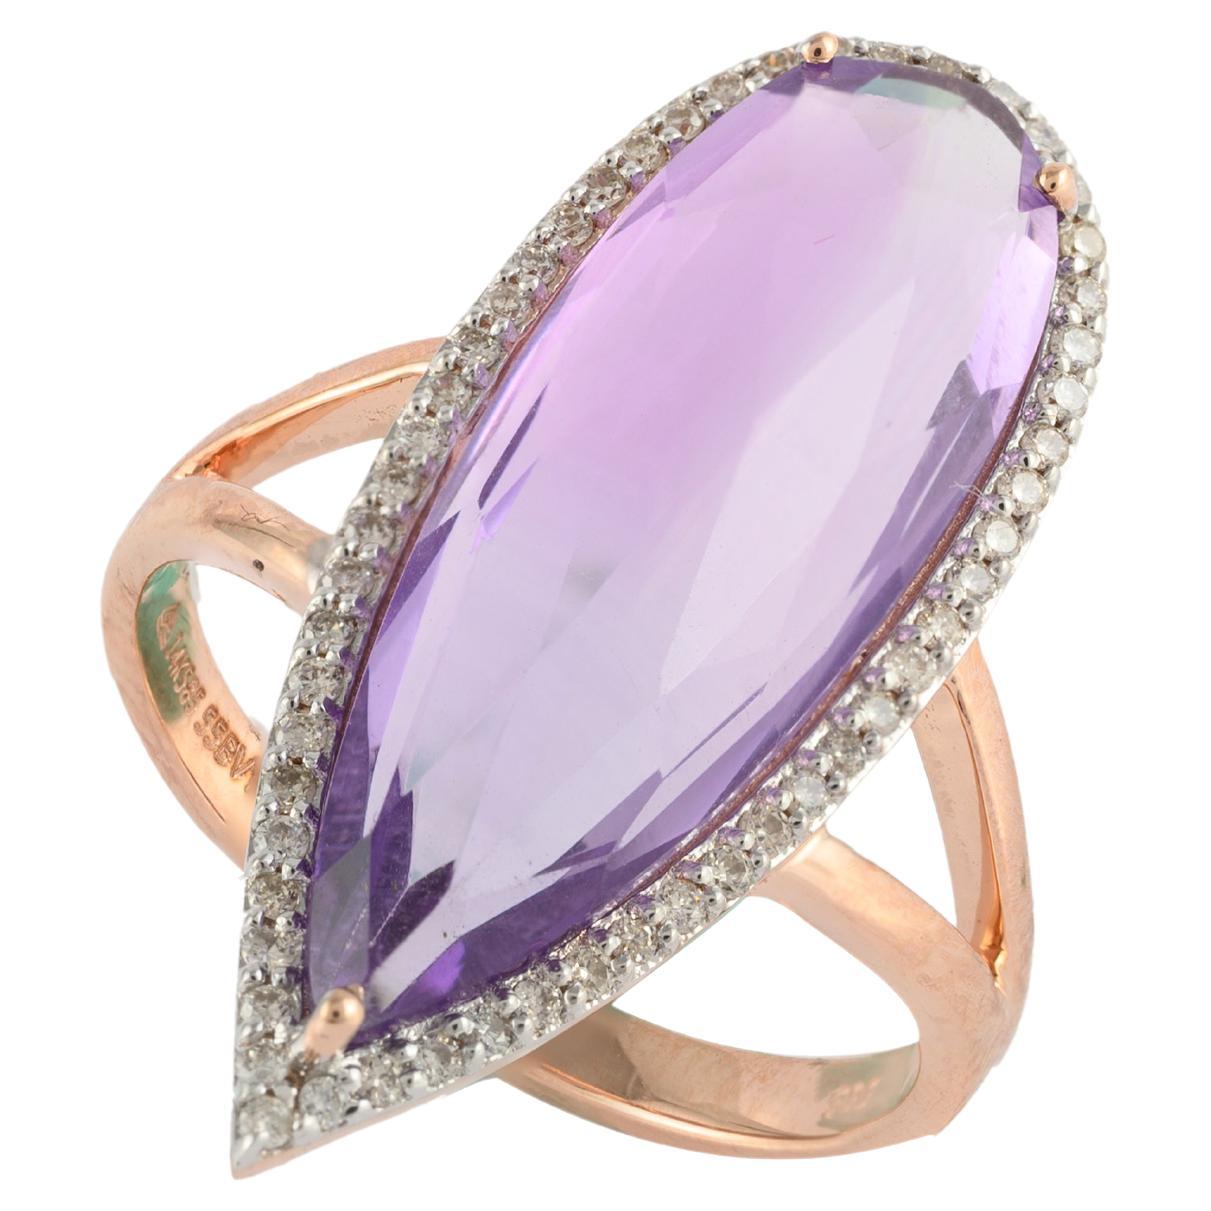 For Sale:  Crystal Clear Statement Amethyst Ring in 14k Rose Gold Settings & Halo Diamonds